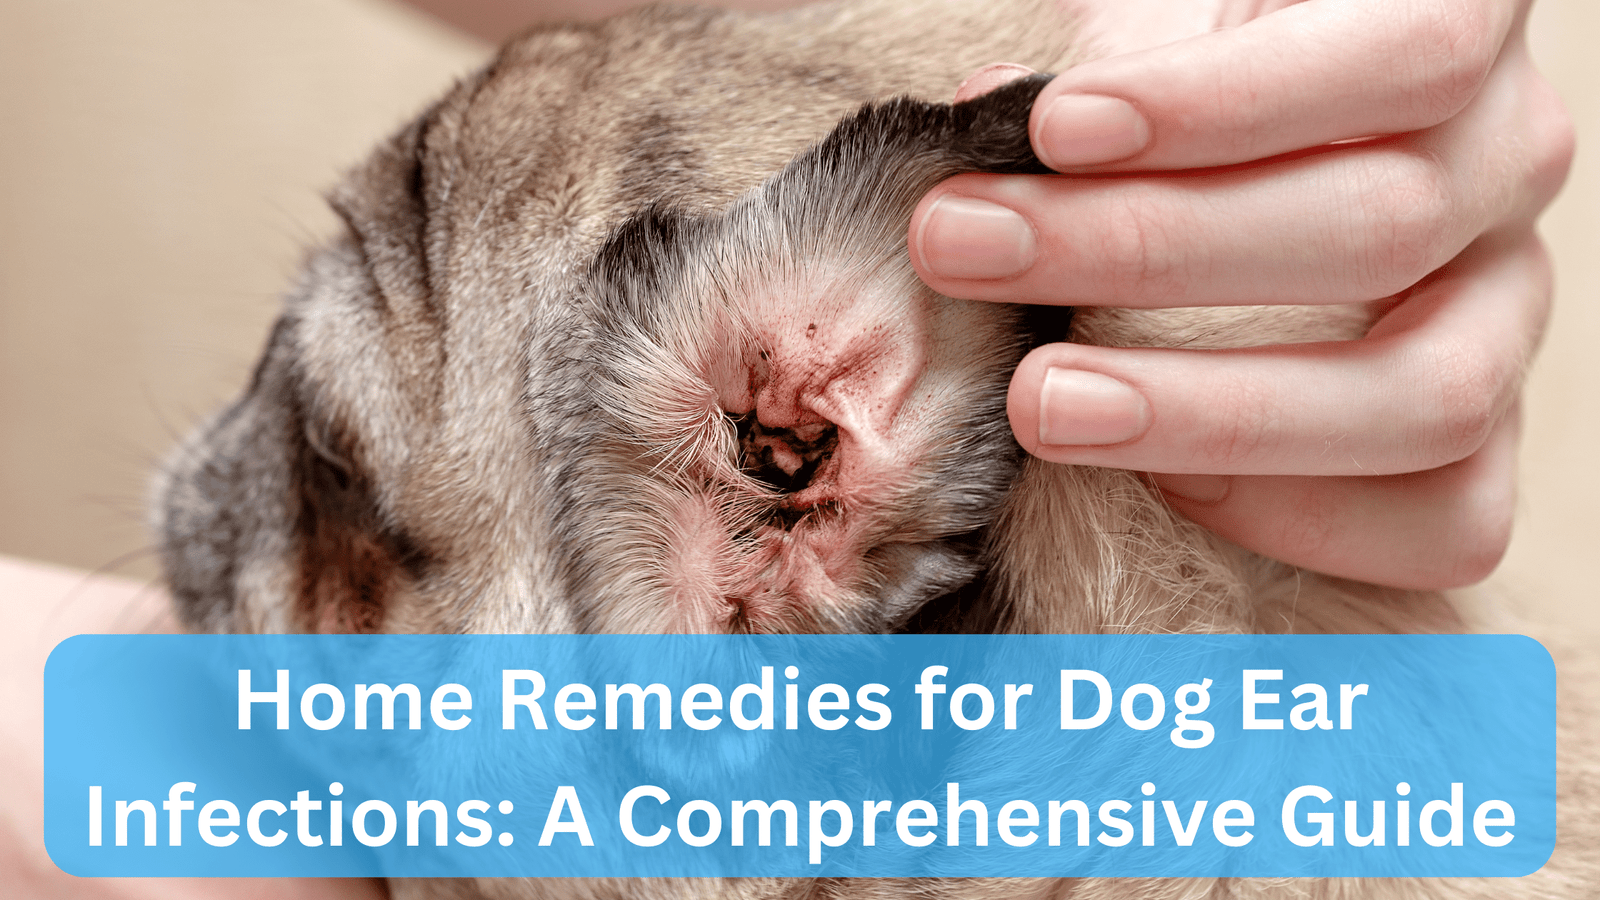 Home Remedies for Dog Ear Infections